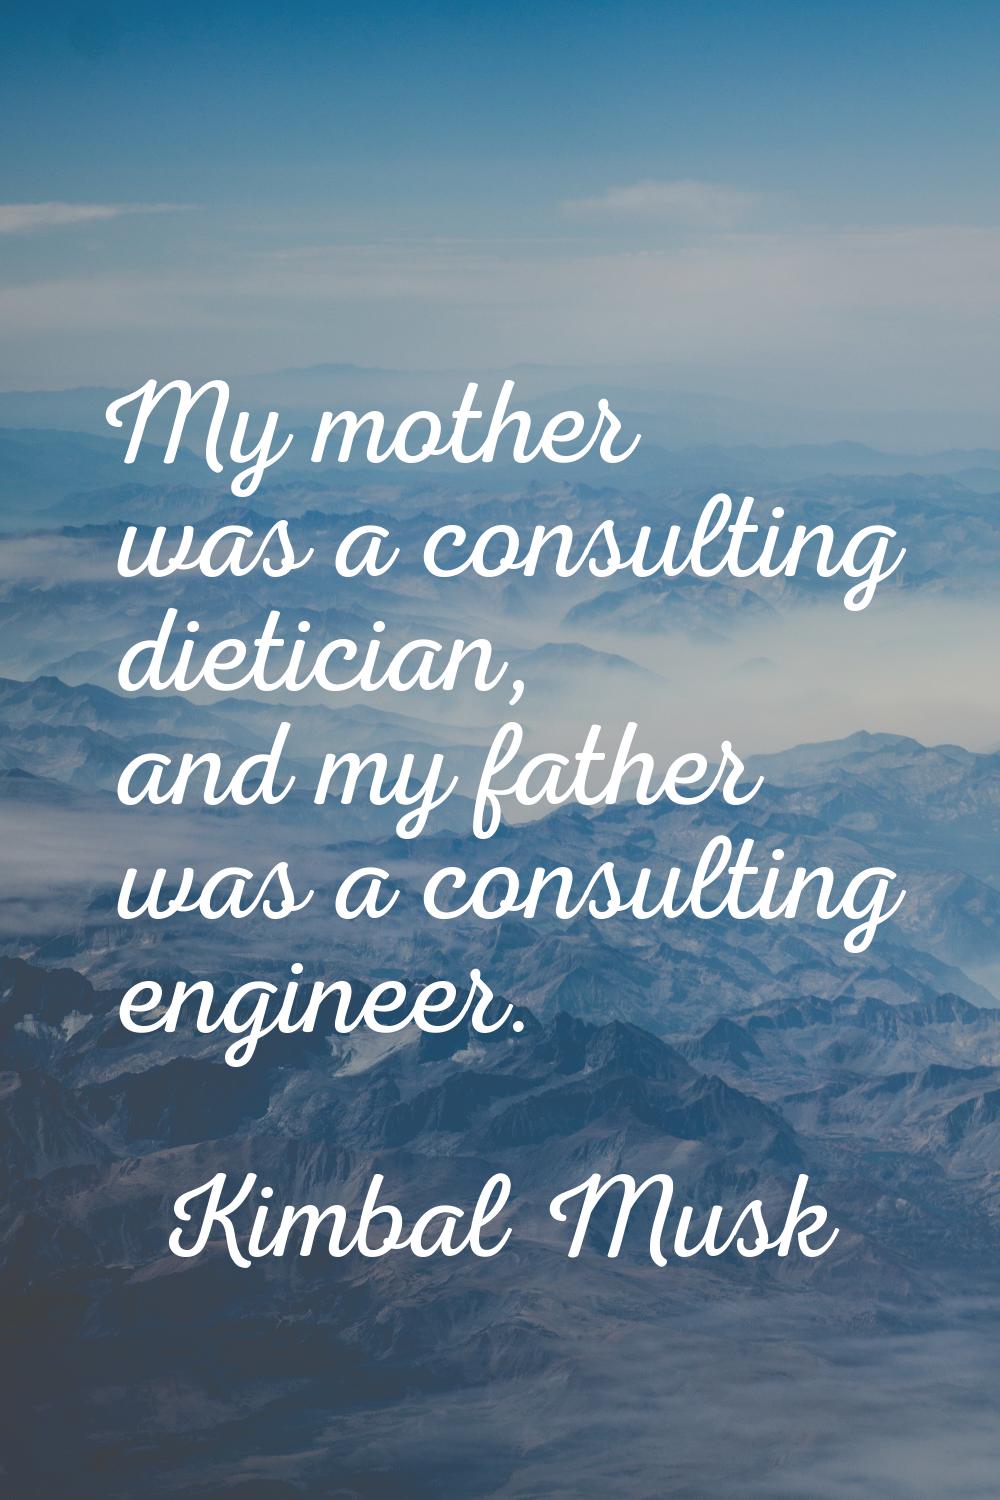 My mother was a consulting dietician, and my father was a consulting engineer.